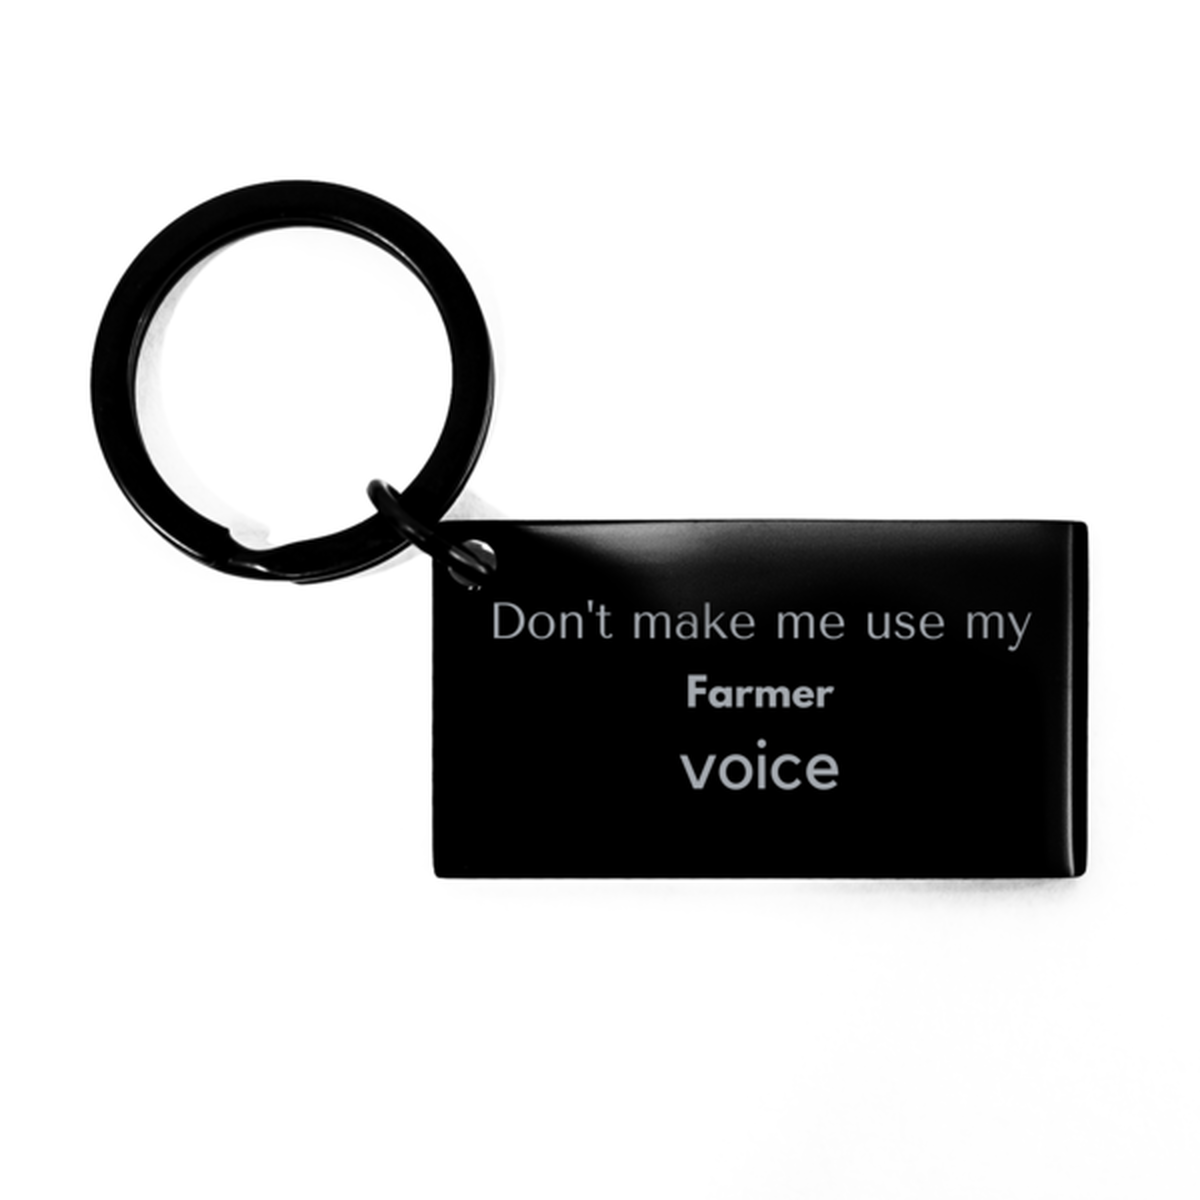 Don't make me use my Farmer voice, Sarcasm Farmer Gifts, Christmas Farmer Keychain Birthday Unique Gifts For Farmer Coworkers, Men, Women, Colleague, Friends